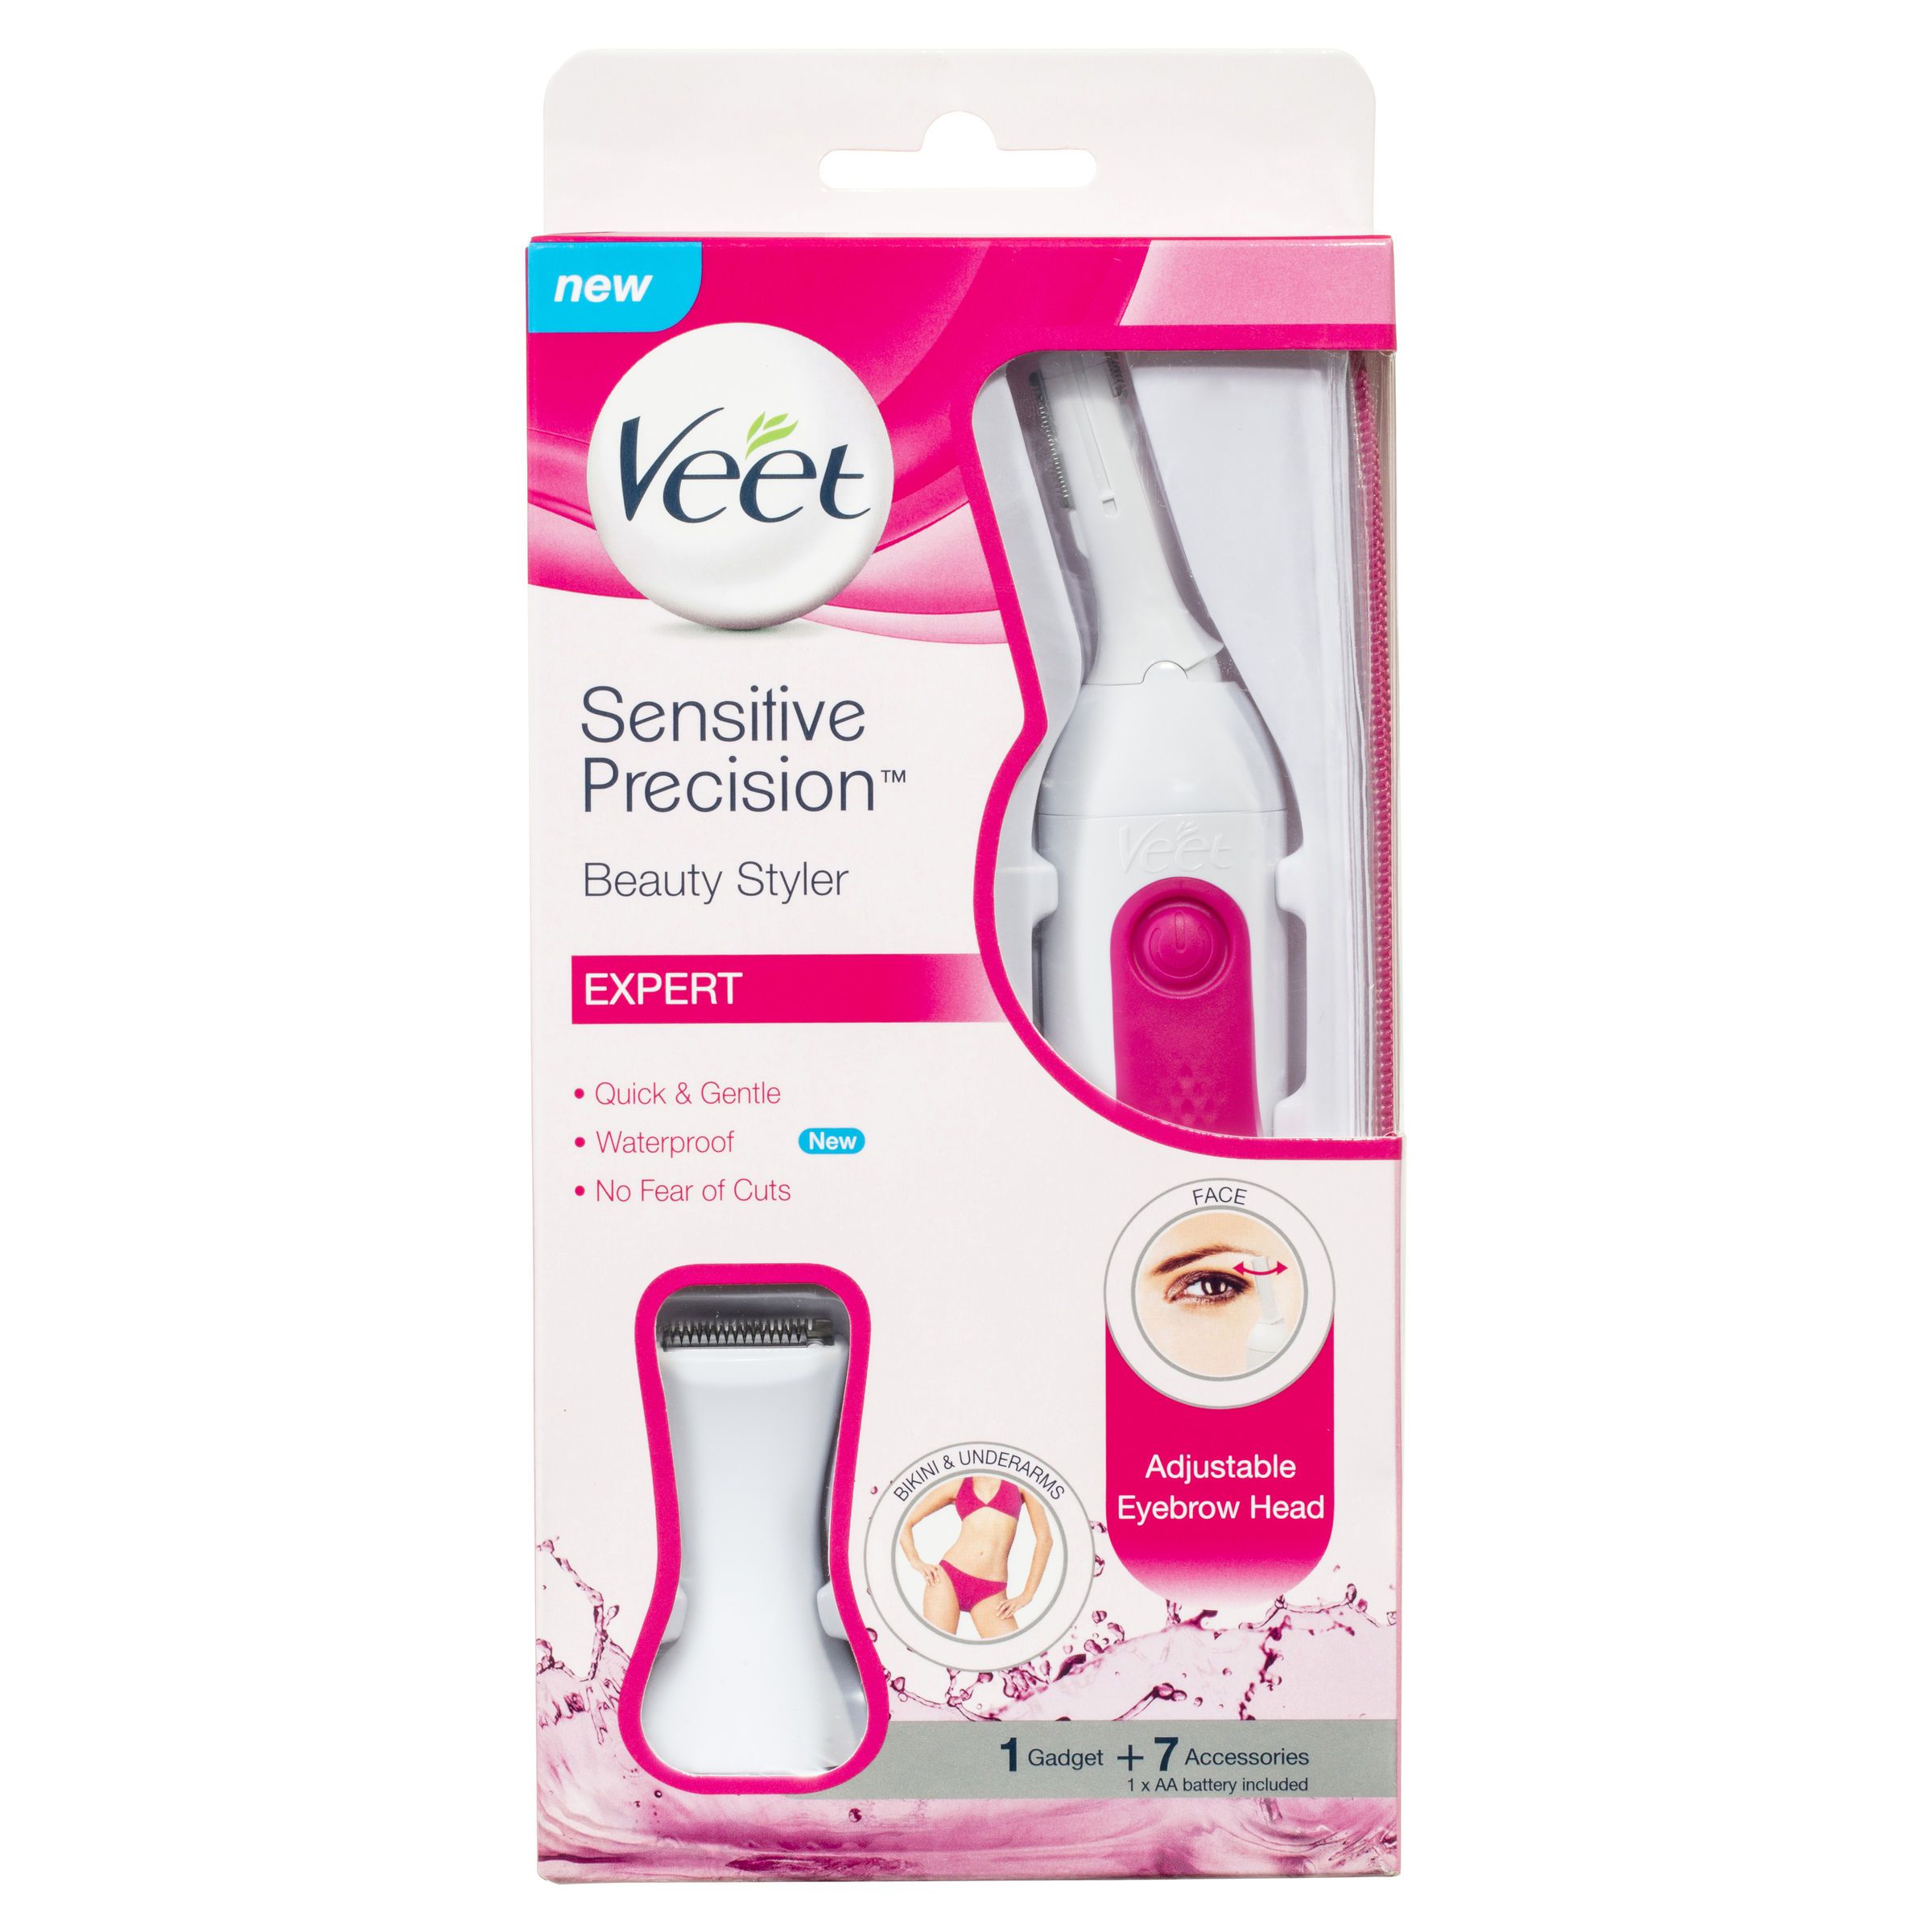 best hair removal trimmer for ladies